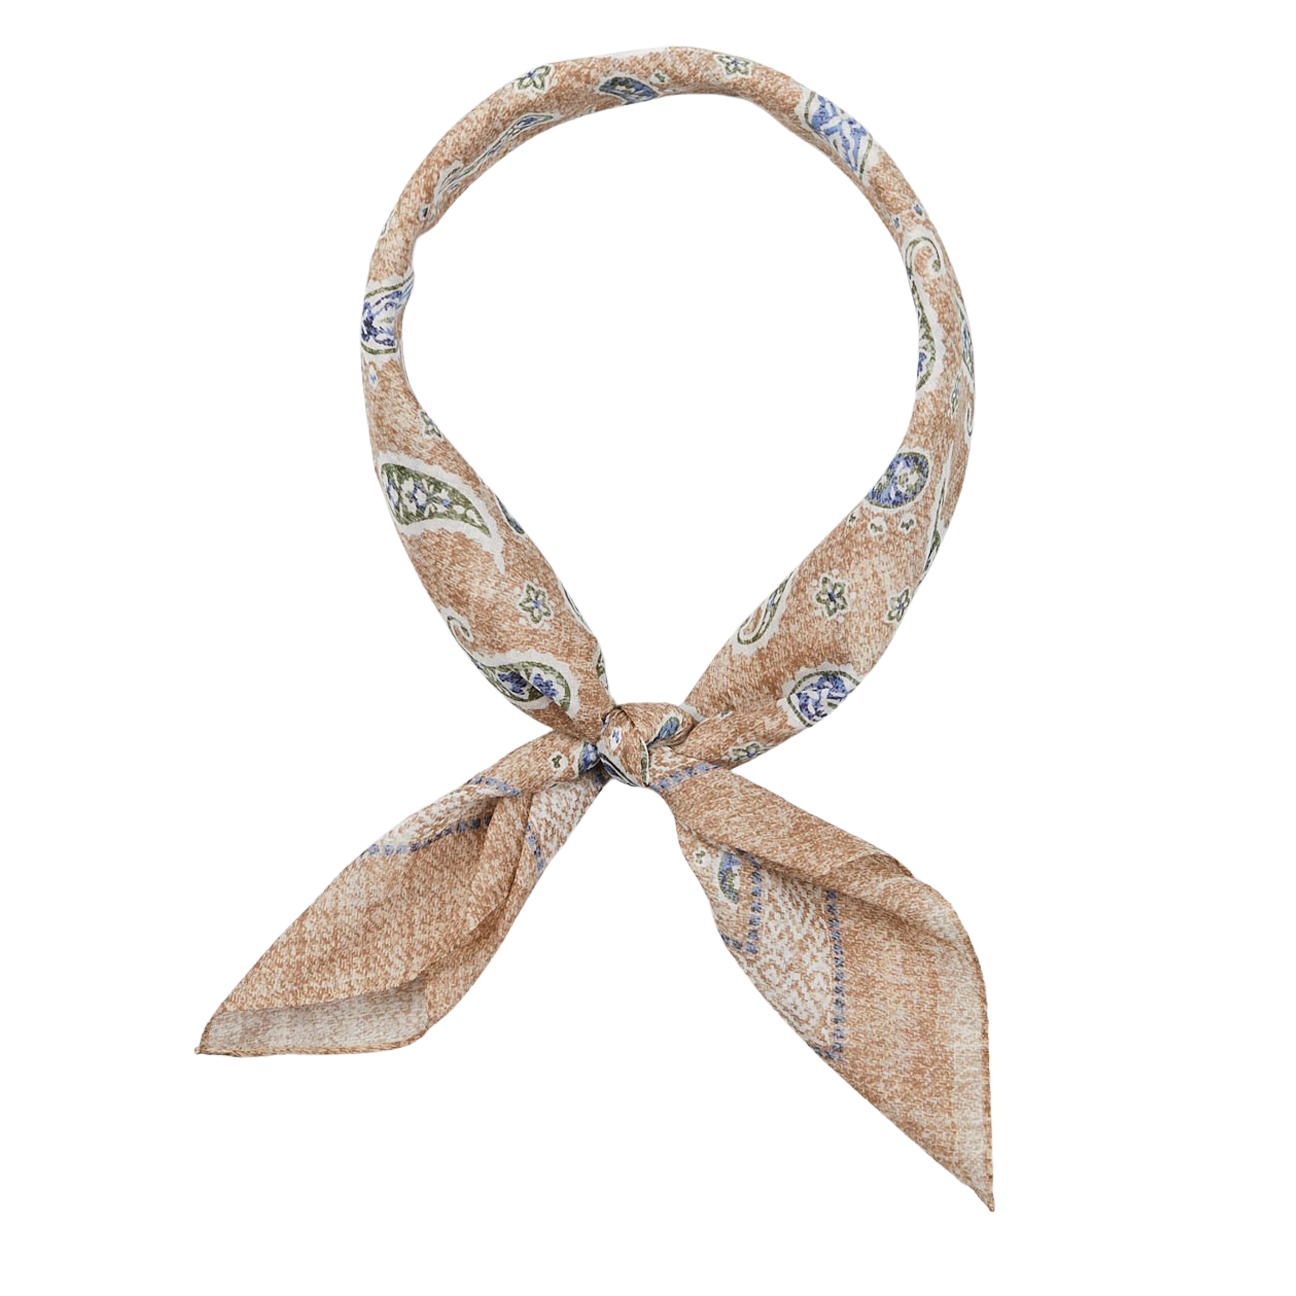 Beige Melange Paisley Print Cotton Bandana by Amanda Christensen tied in a knot on a white background.